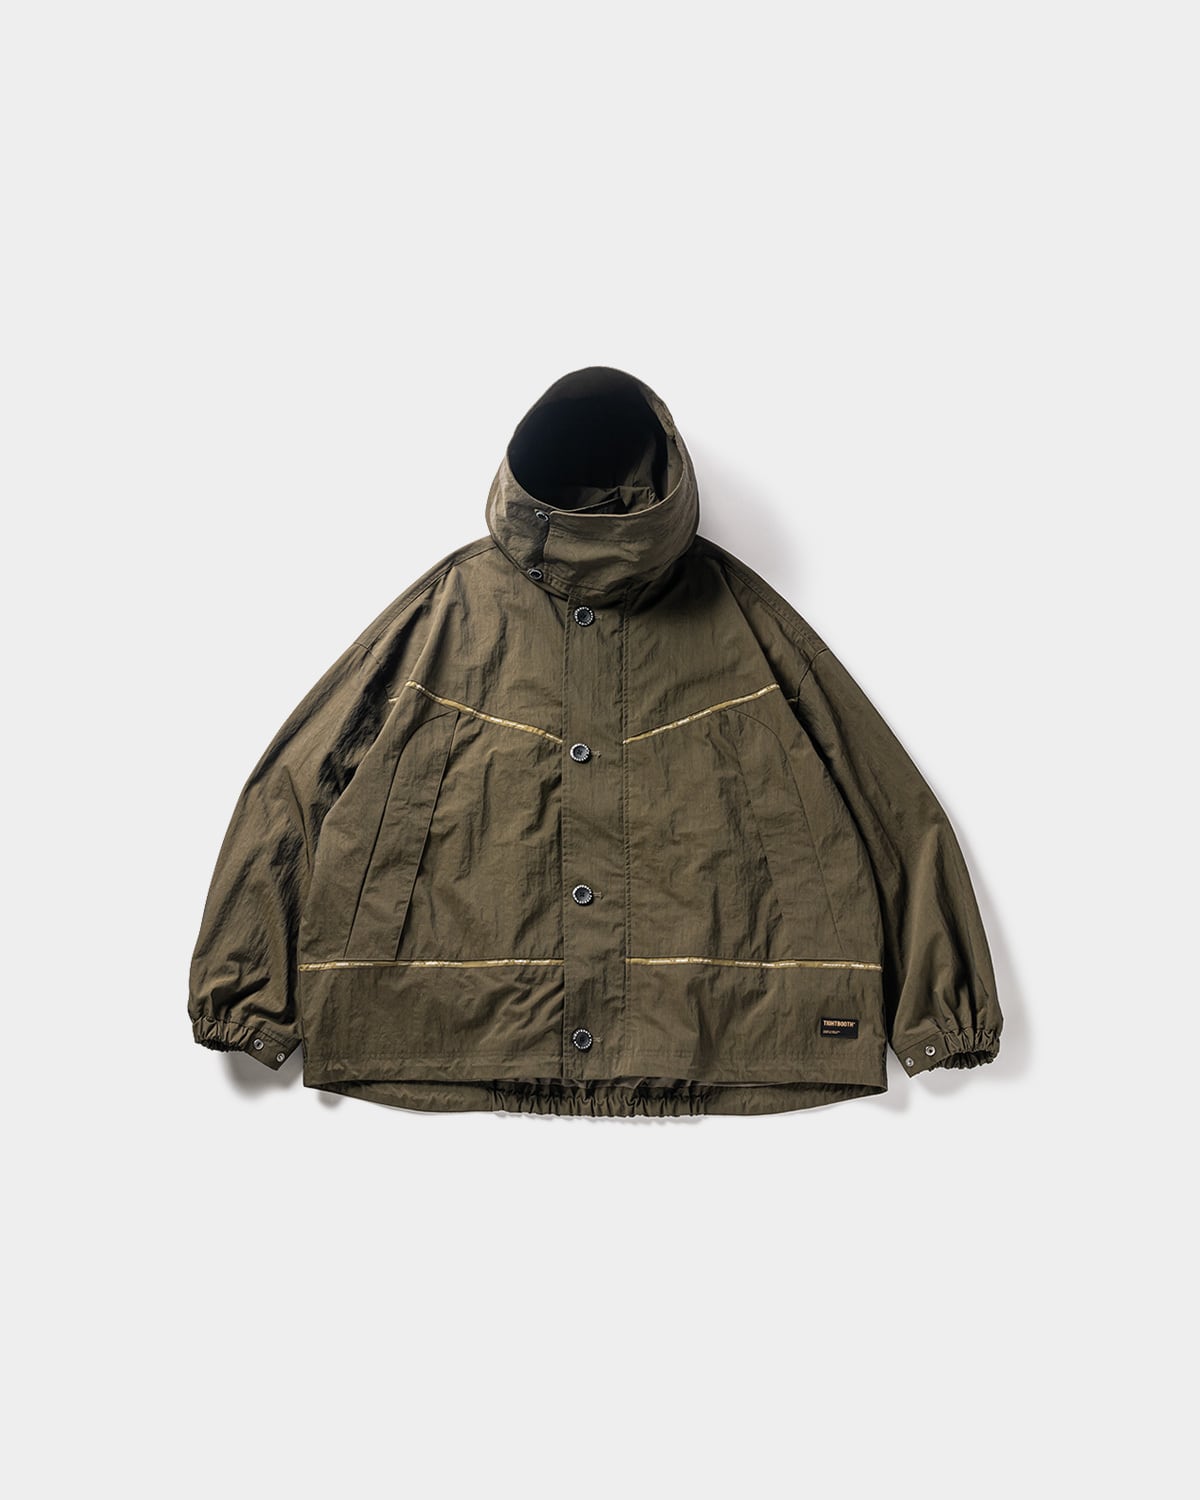 【TIGHTBOOTH】HUNTING JKT(Olive)〈送料無料〉 | STORY powered by BASE